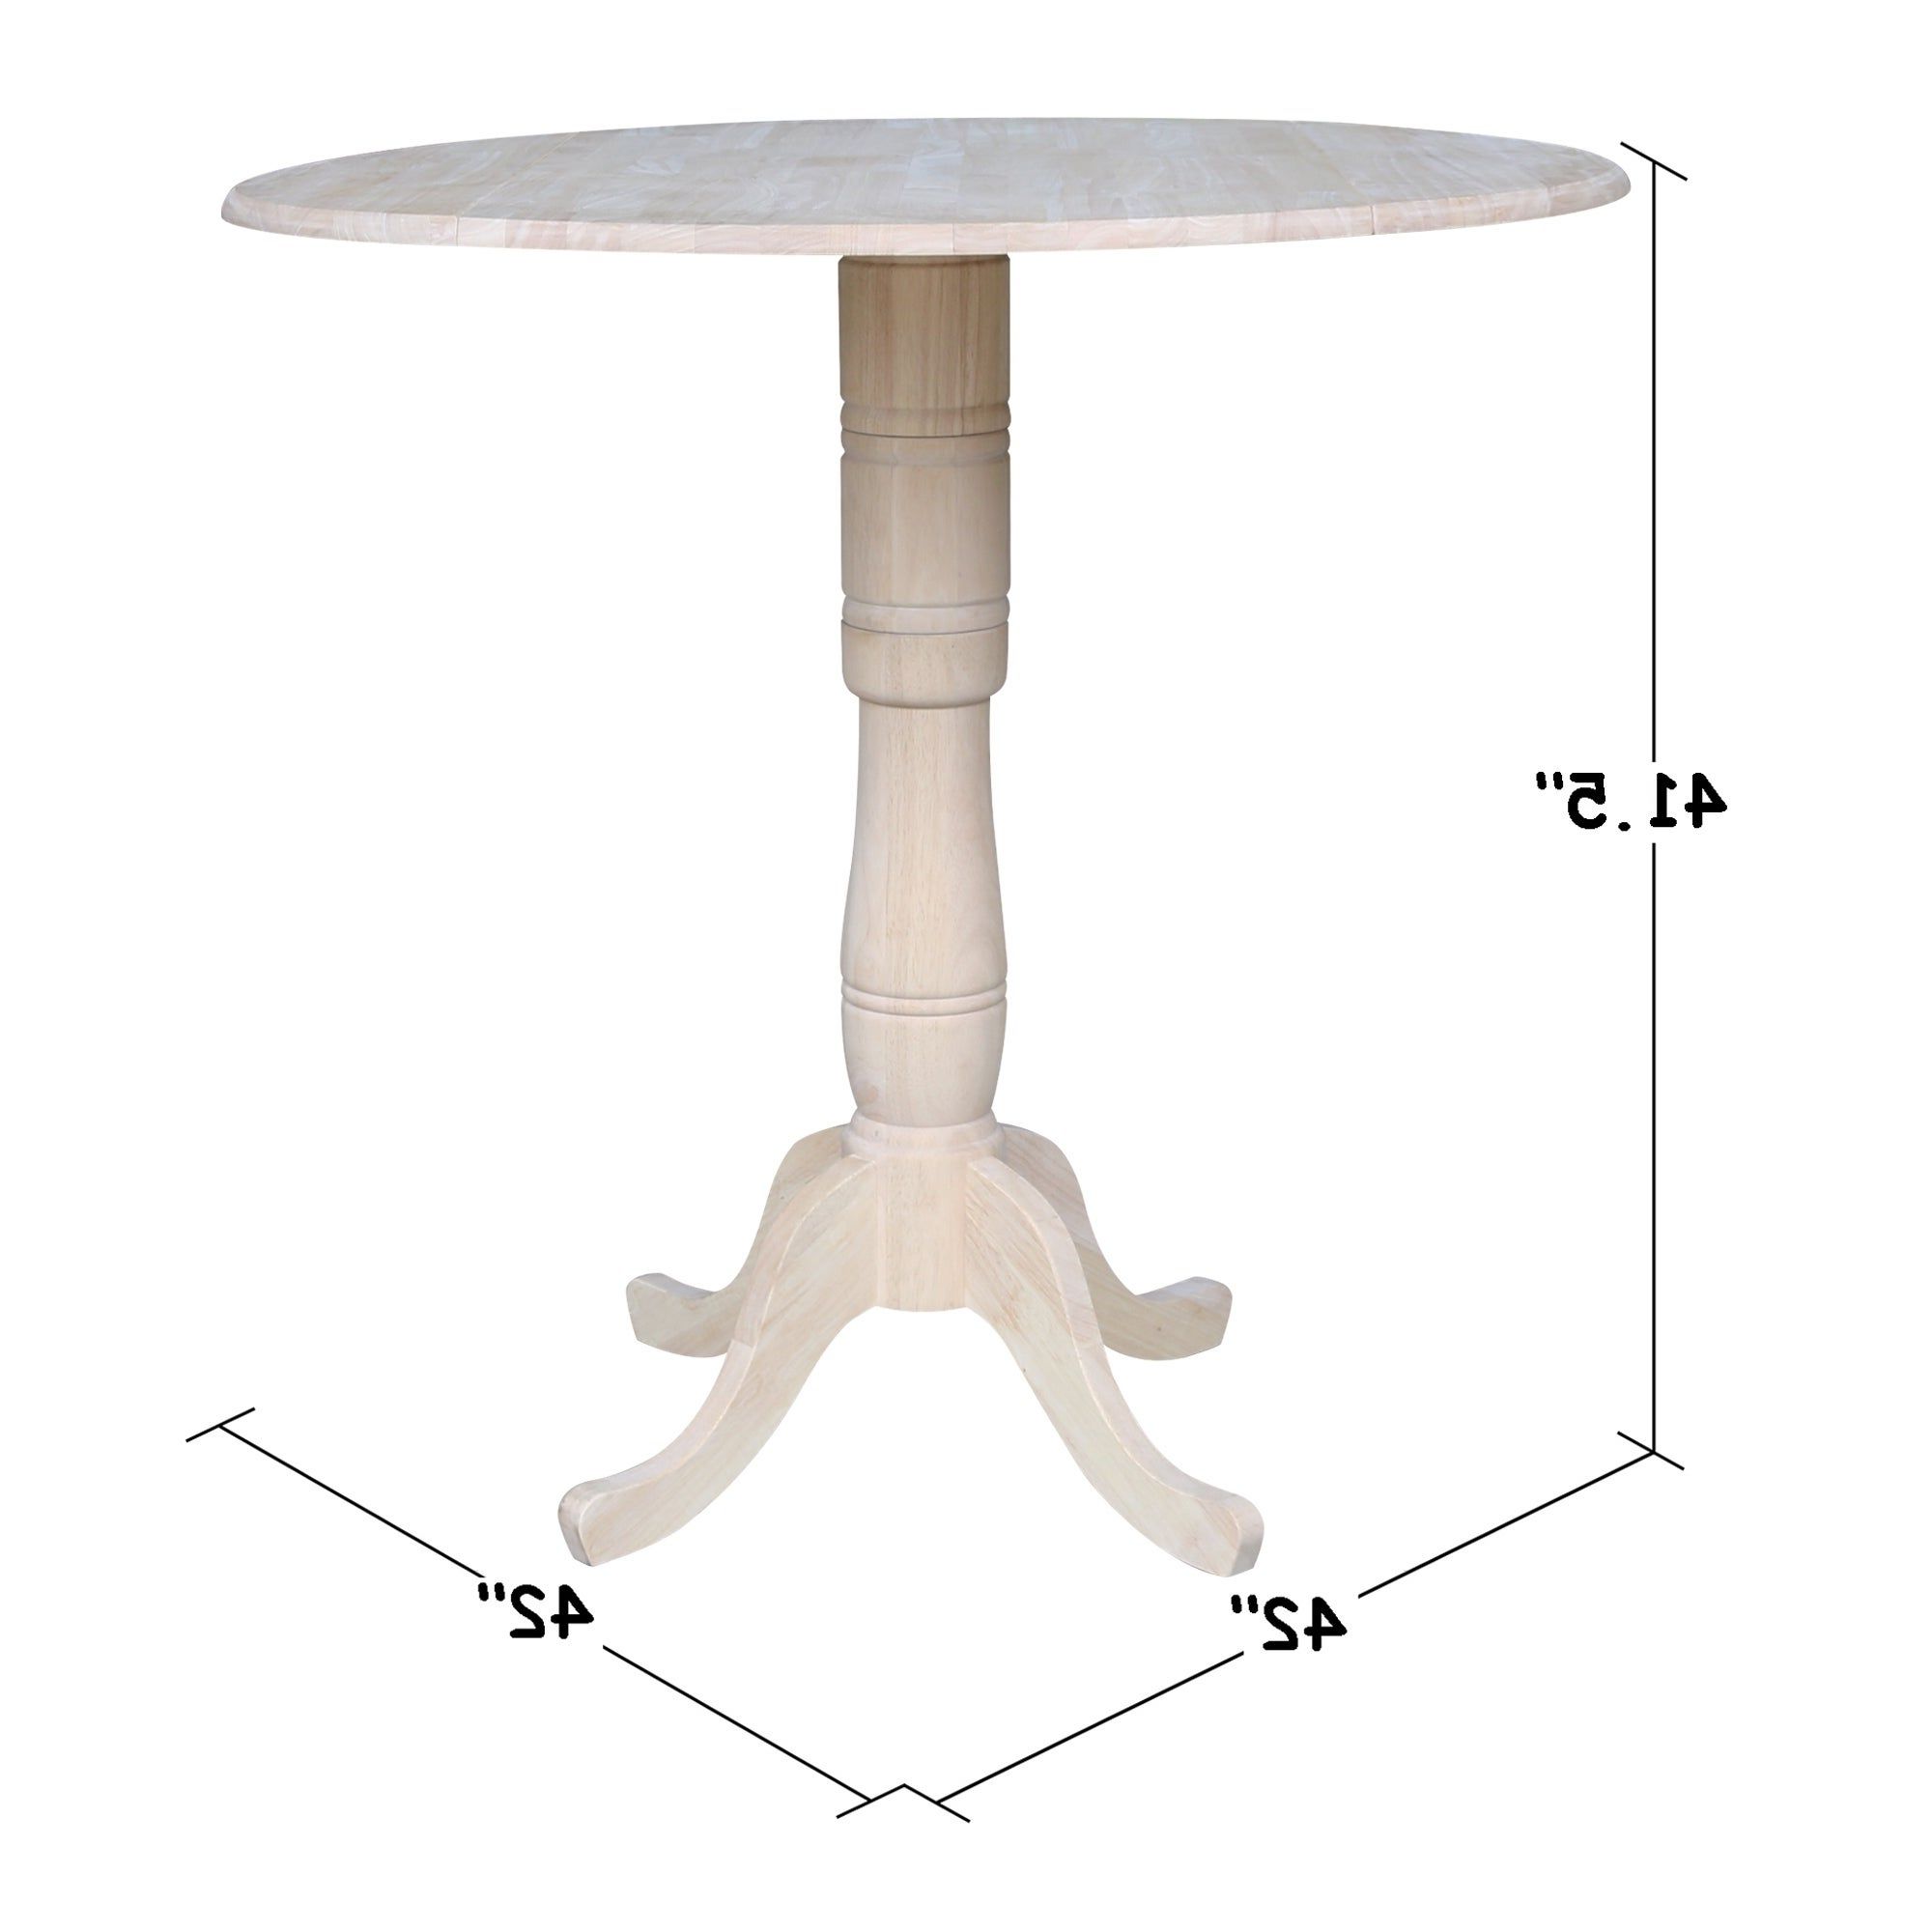 42" Round Pedestal Dual Drop Leaf Table – Unfinished – N/a Pertaining To Preferred Unfinished Drop Leaf Casual Dining Tables (View 7 of 25)